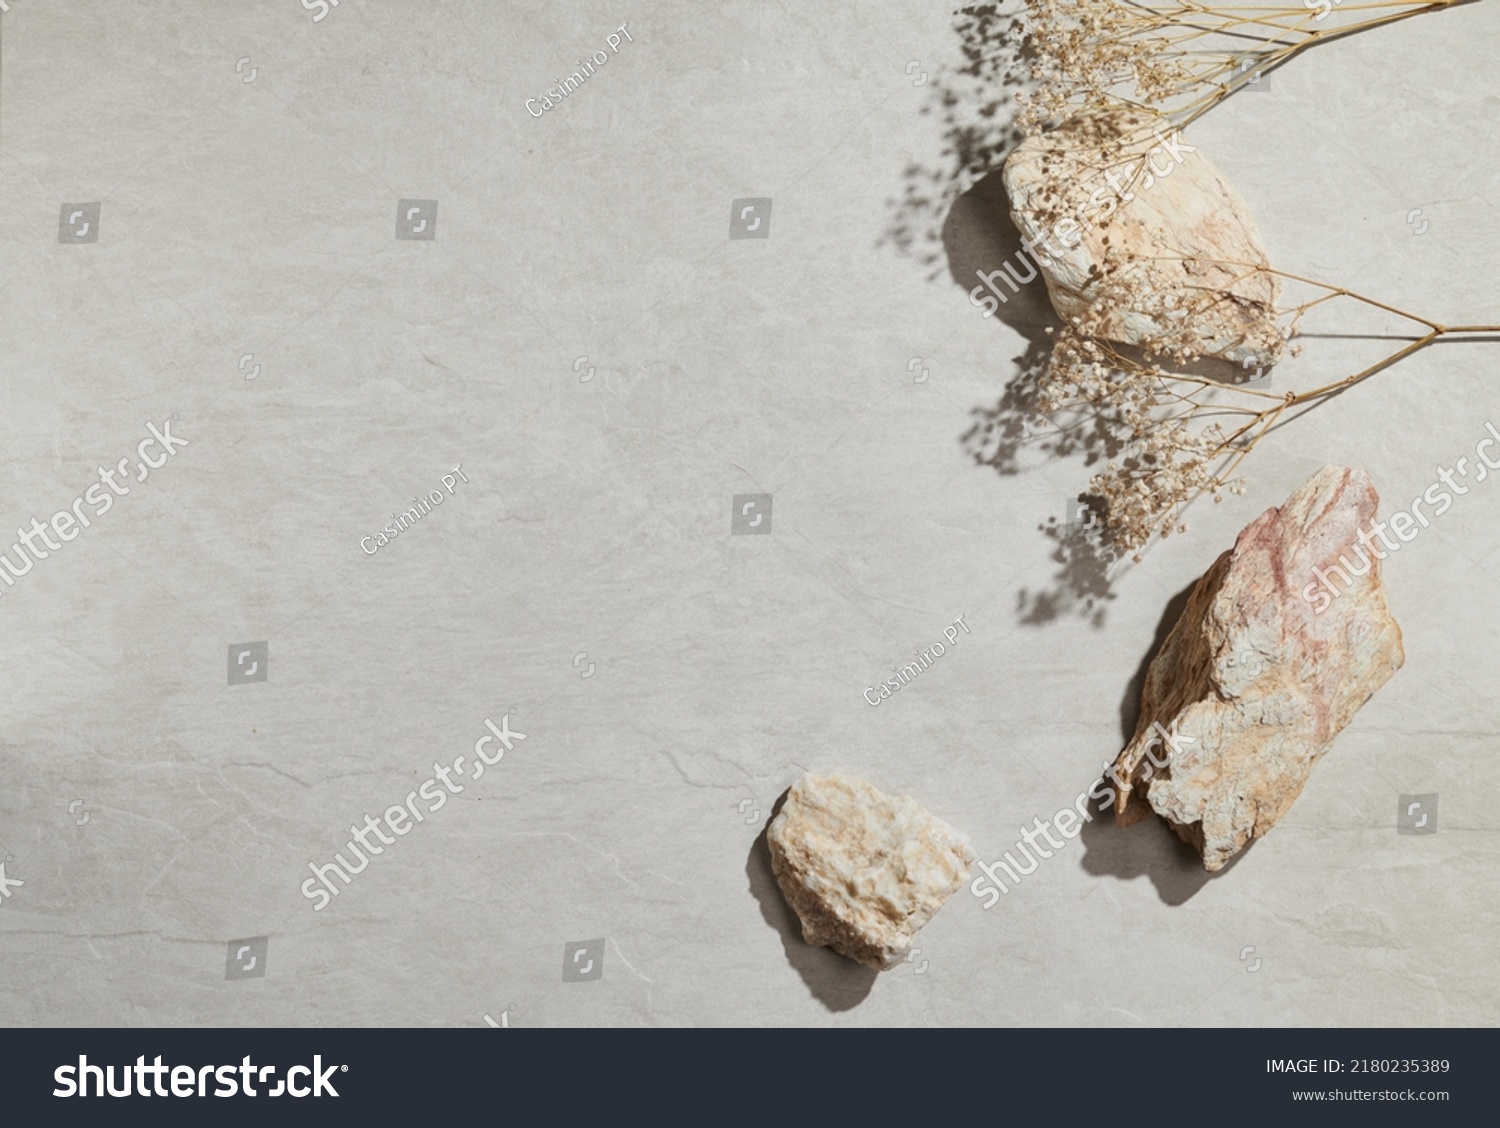 Flatlay minimal natural stone, marble or travertino surface background with stones and dry flowers. Template for showcase, presentations, branding, web desing, posts. #2180235389